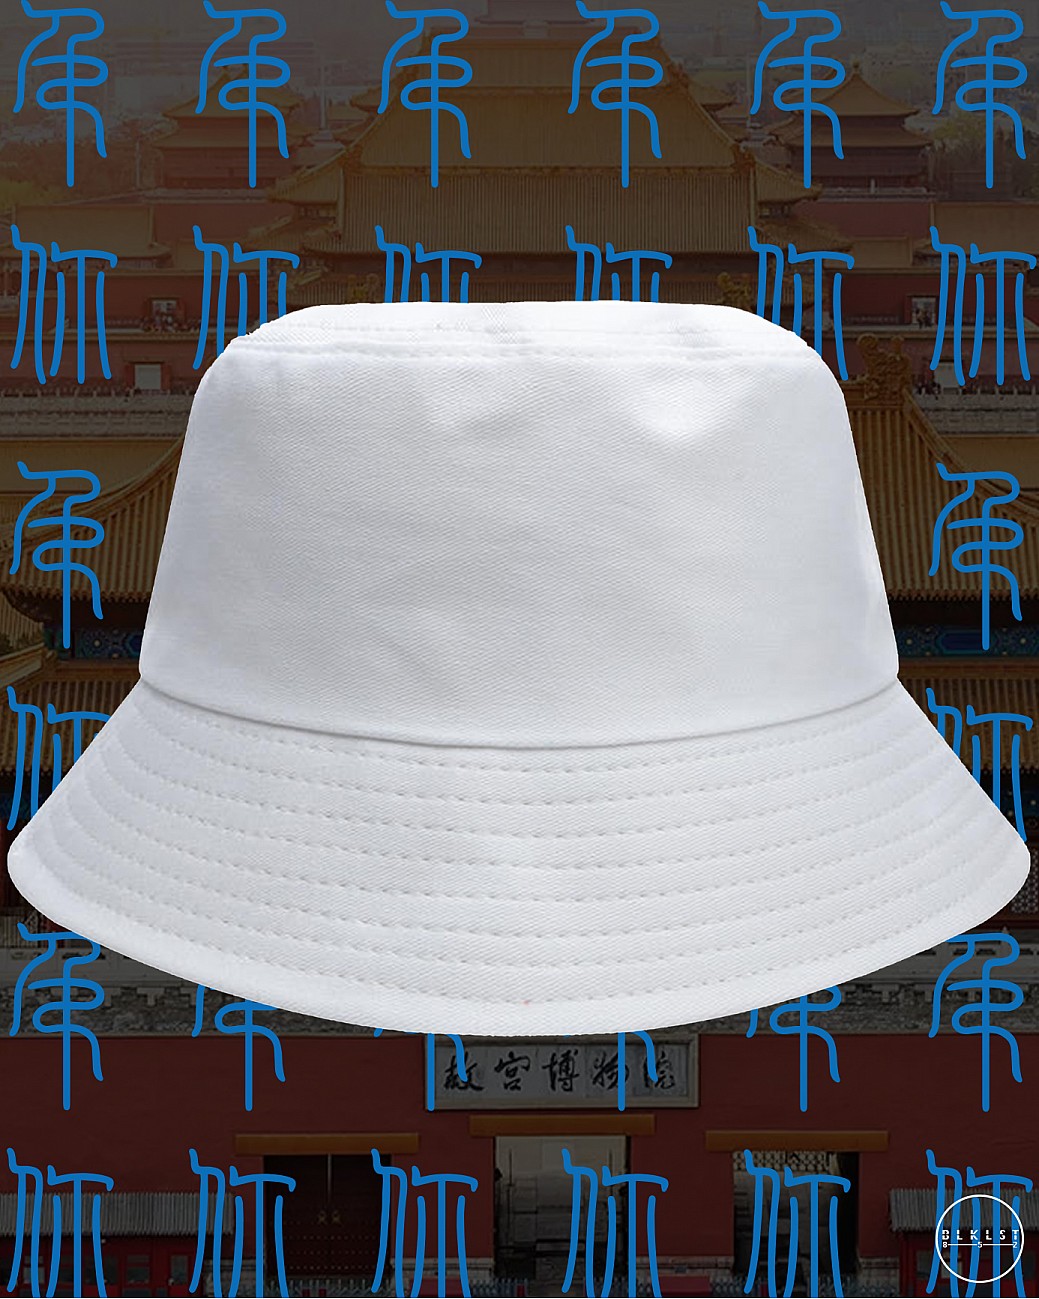 CHARCO 08 (屌你) BUCKETHAT